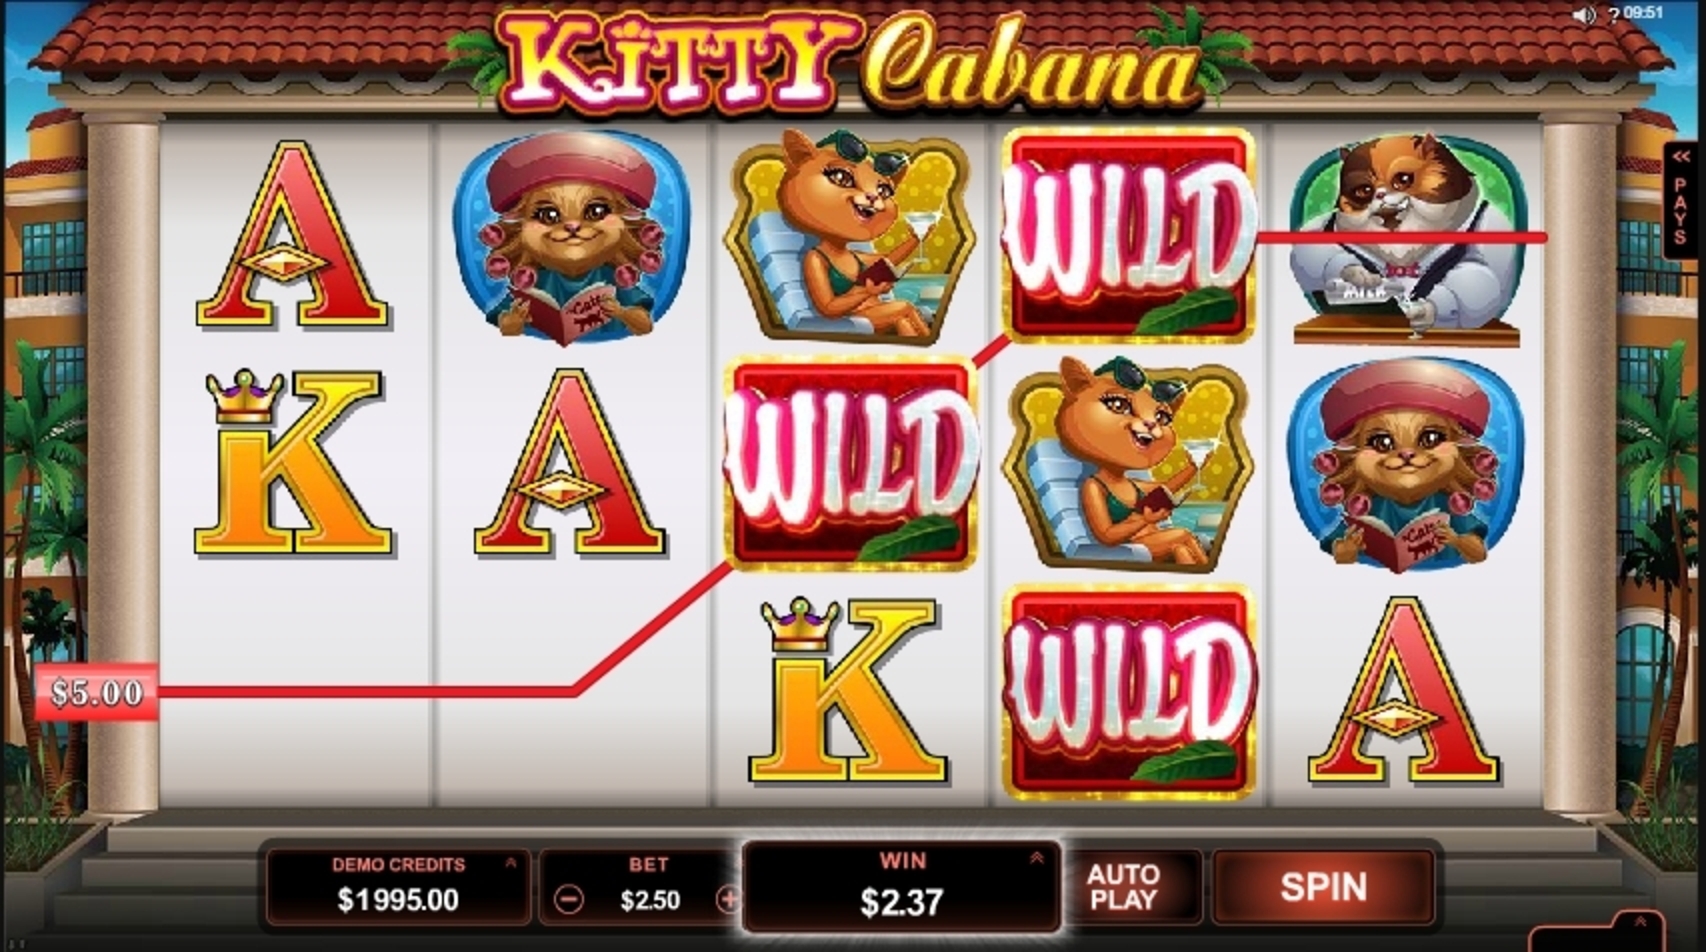 Win Money in Kitty Cabana Free Slot Game by Microgaming